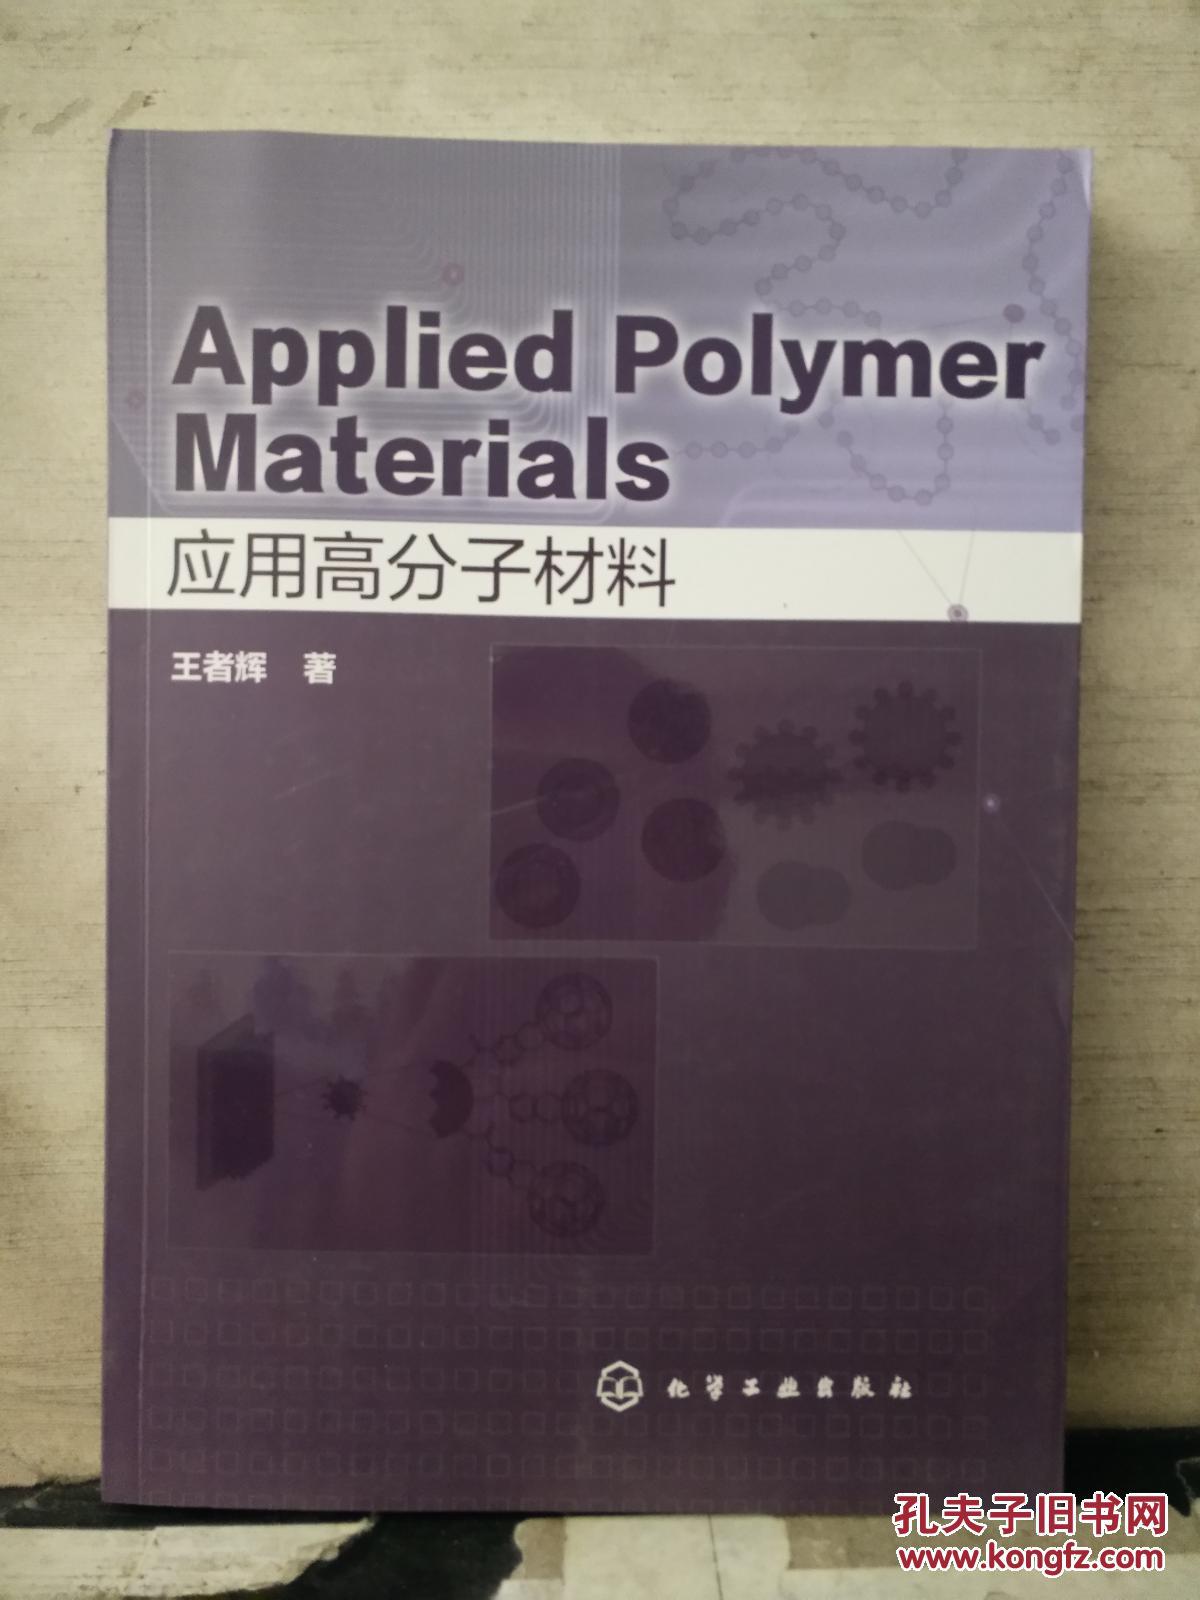 Applied Polymer Materials (应用高分子材料)